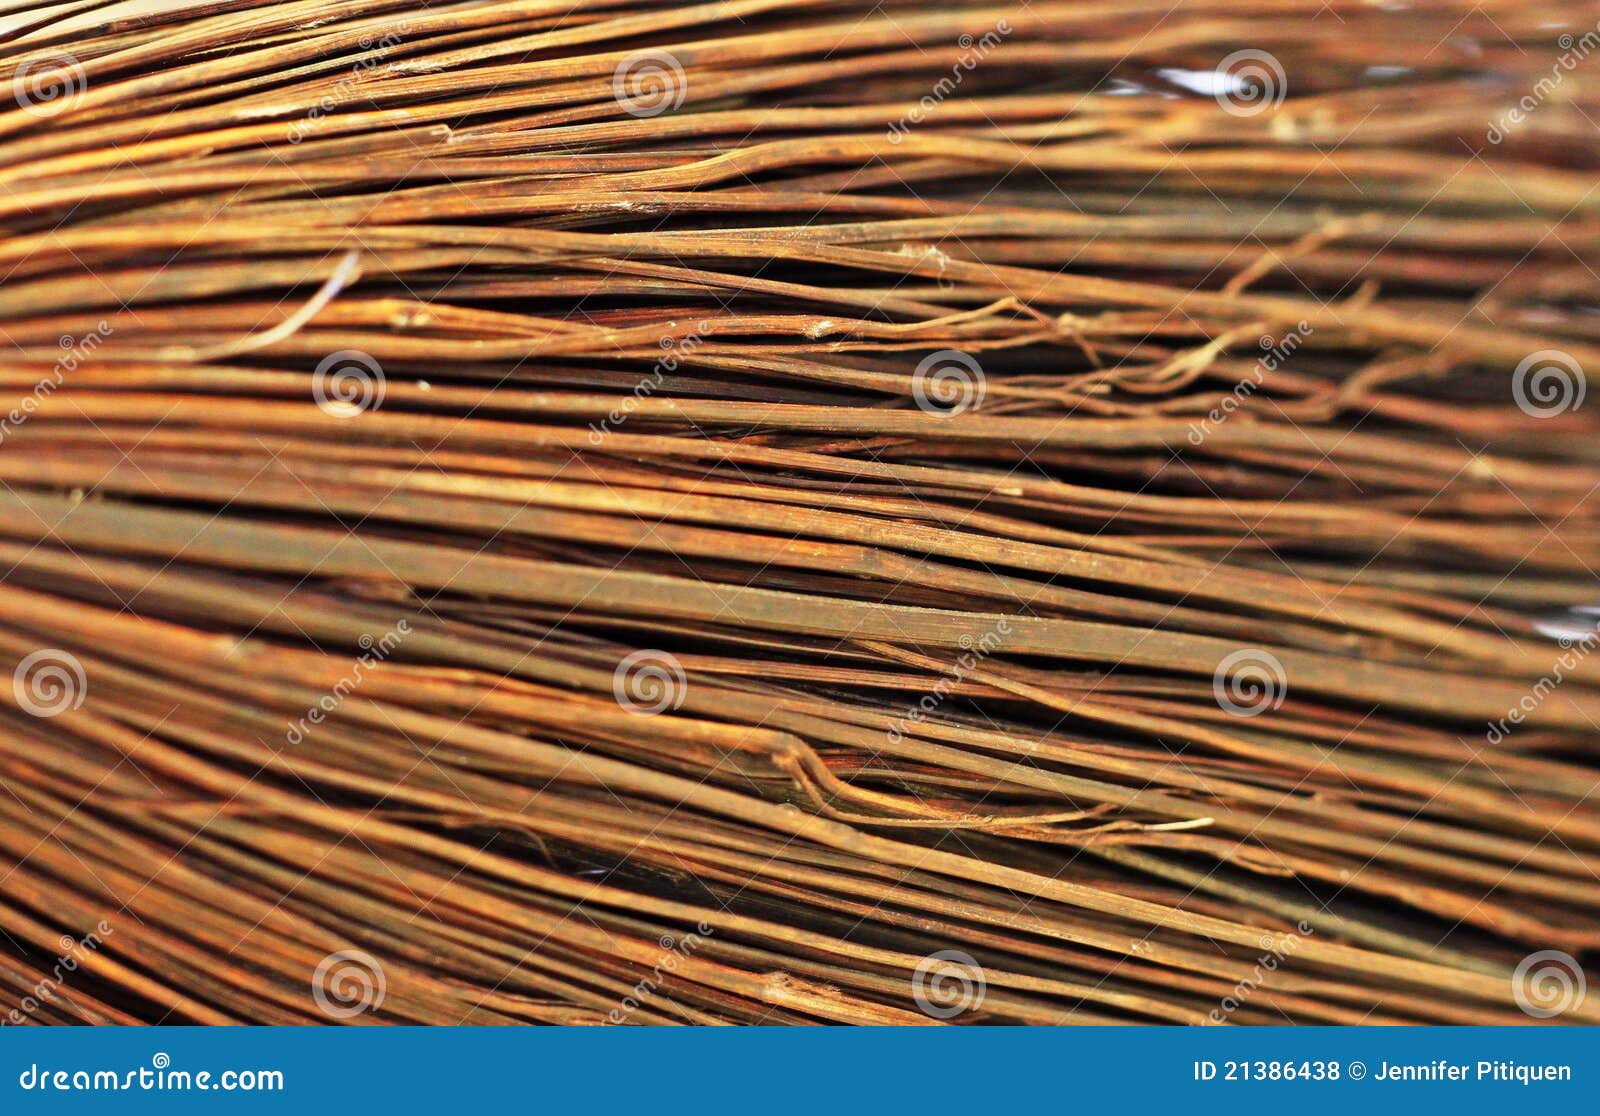 Stick Abstract stock photo. Image of strand, abstract - 21386438